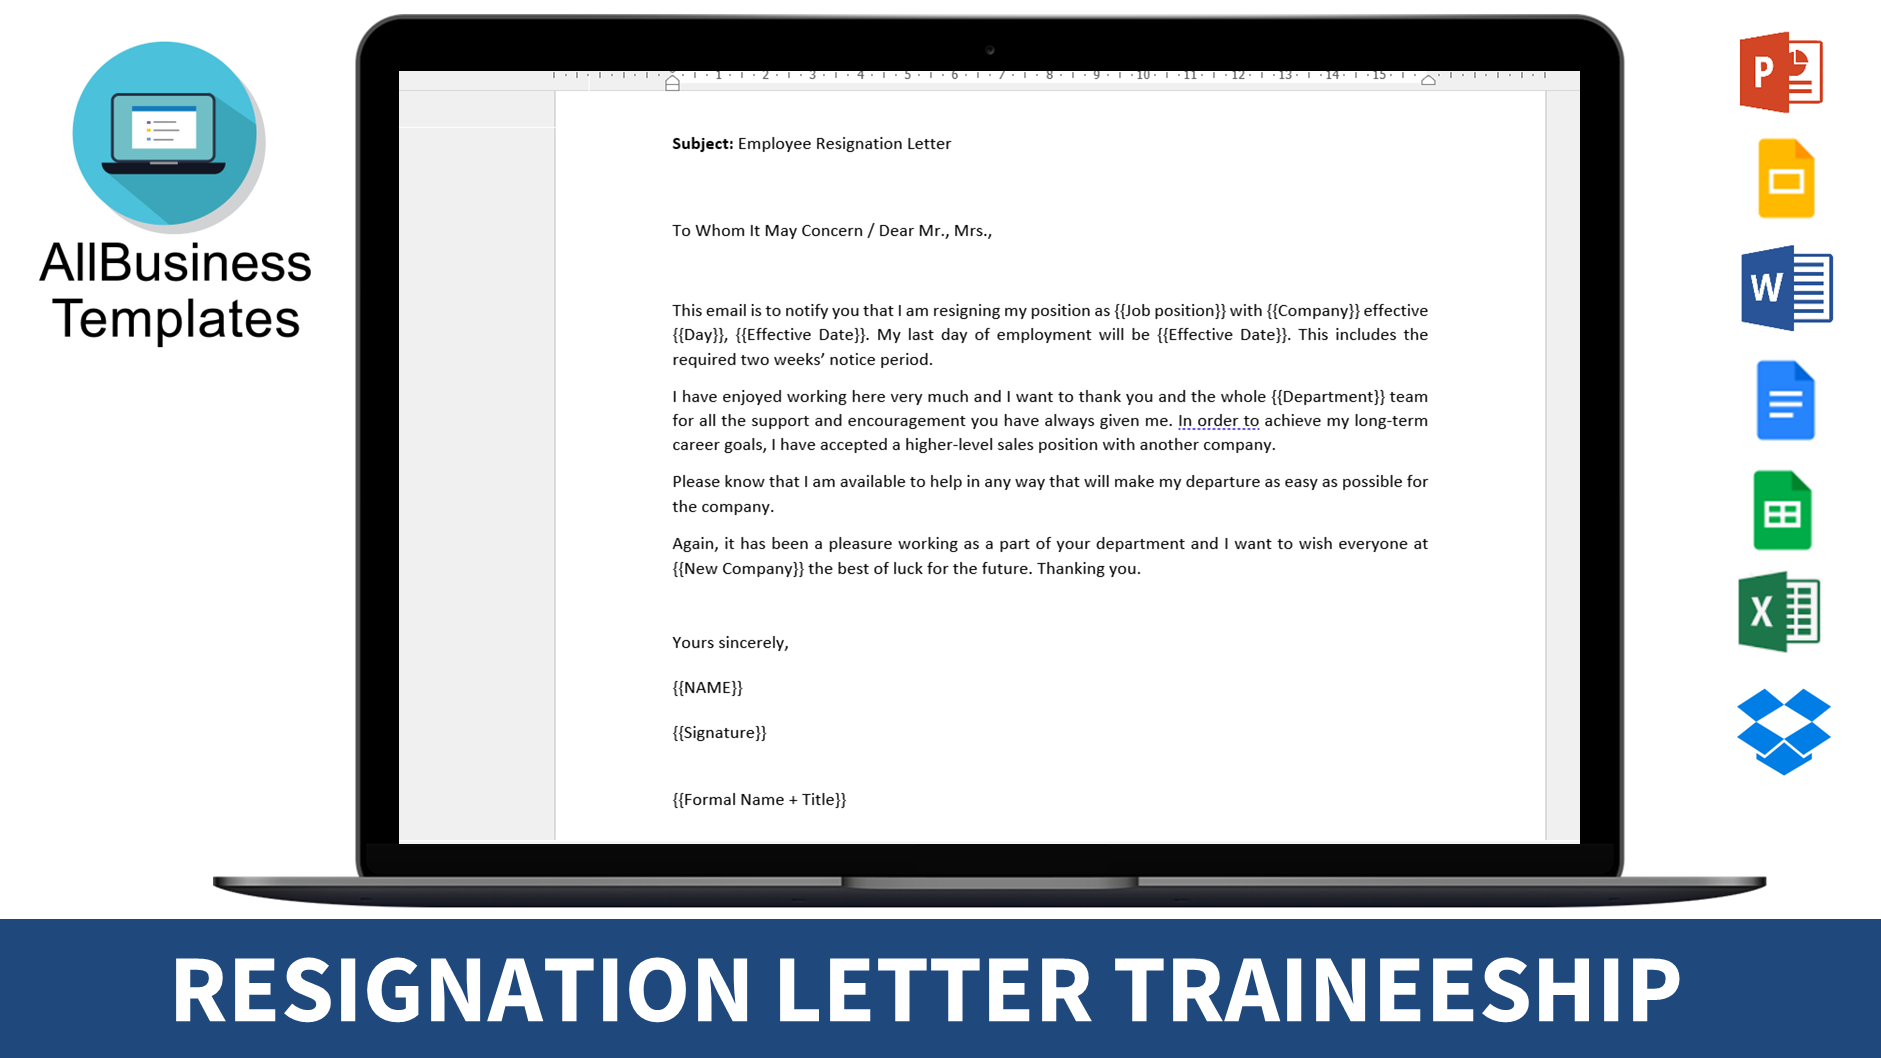 Resignation Letter For Trainee 模板